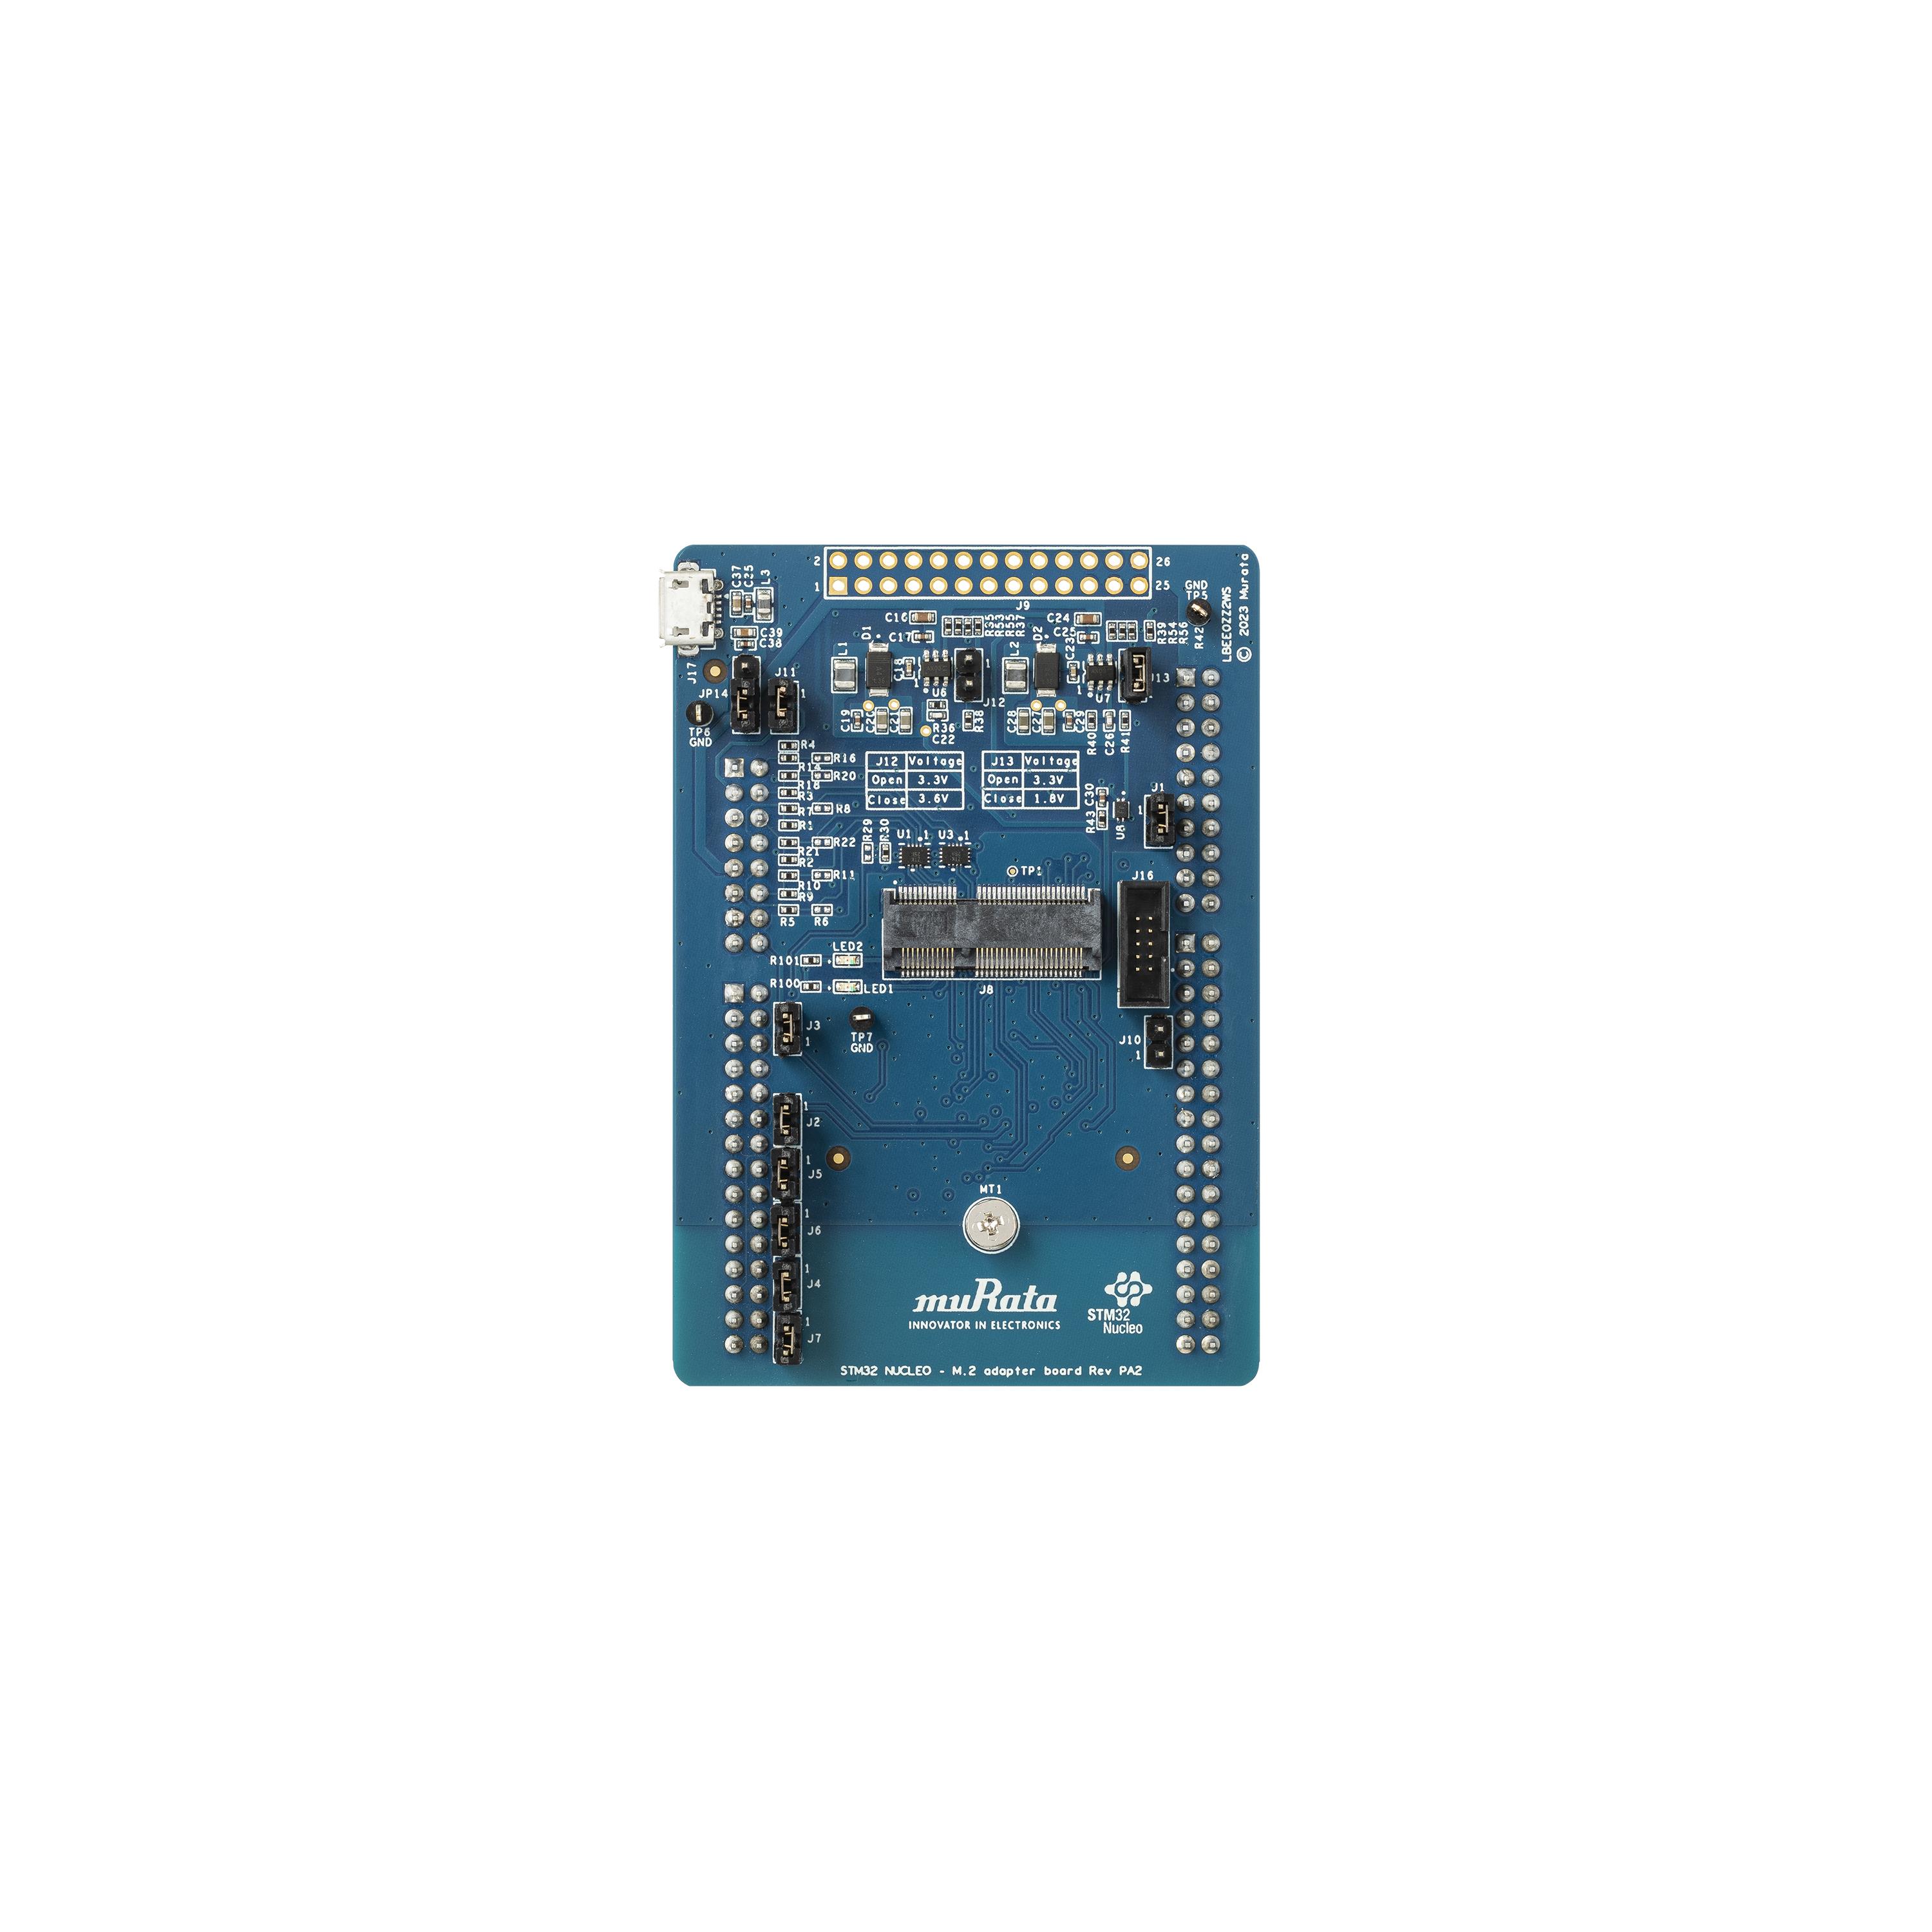 【LBEE0ZZ2WS-ST-NCL】ADAPTER STM32 NUCLEO 144 TO M.2